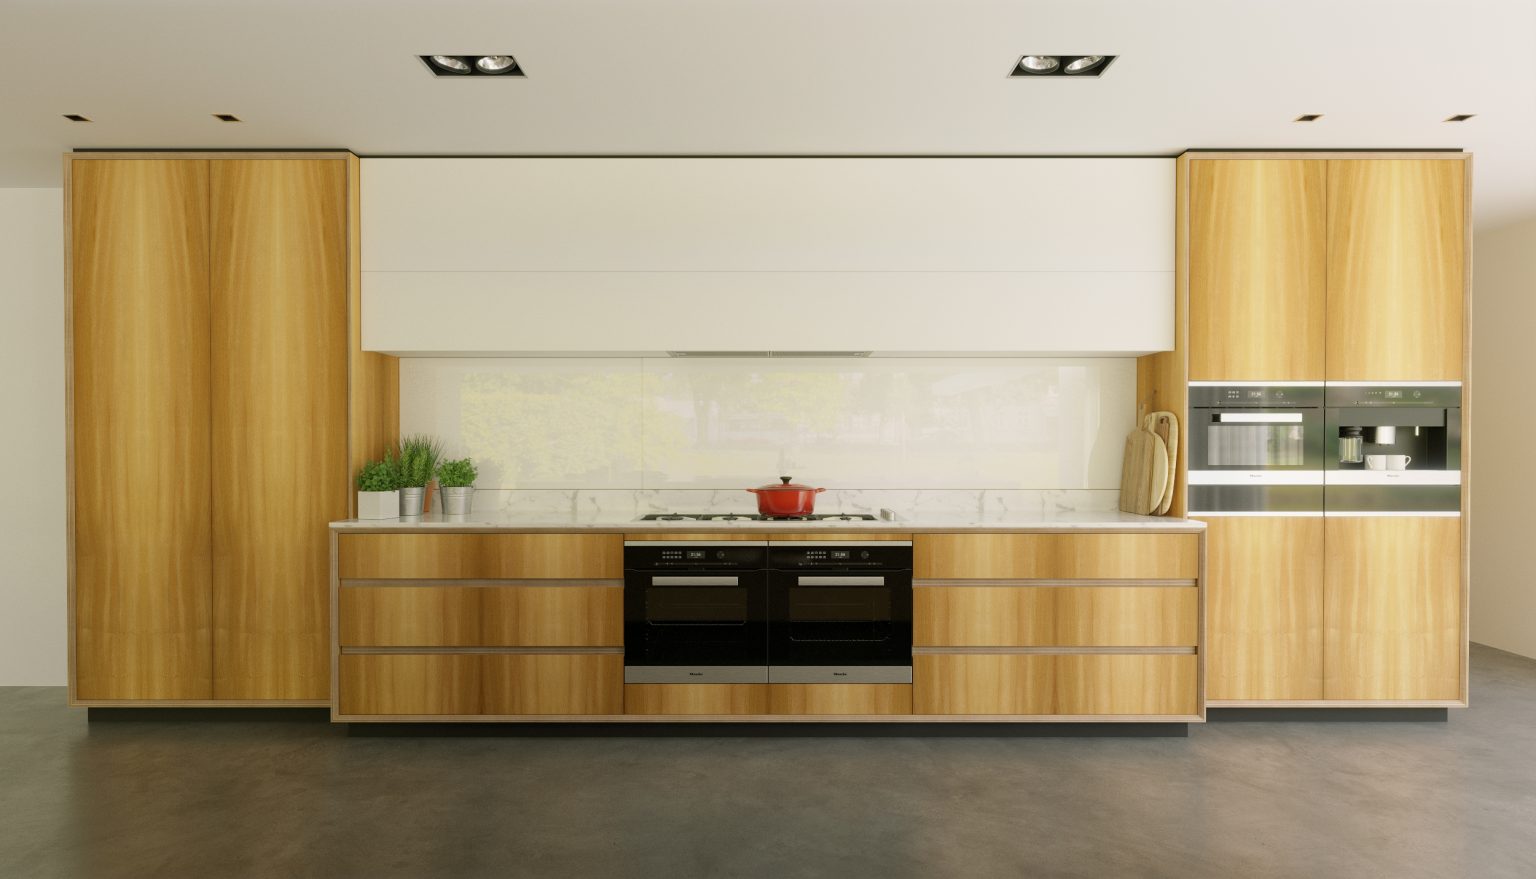 plywood wall in kitchen